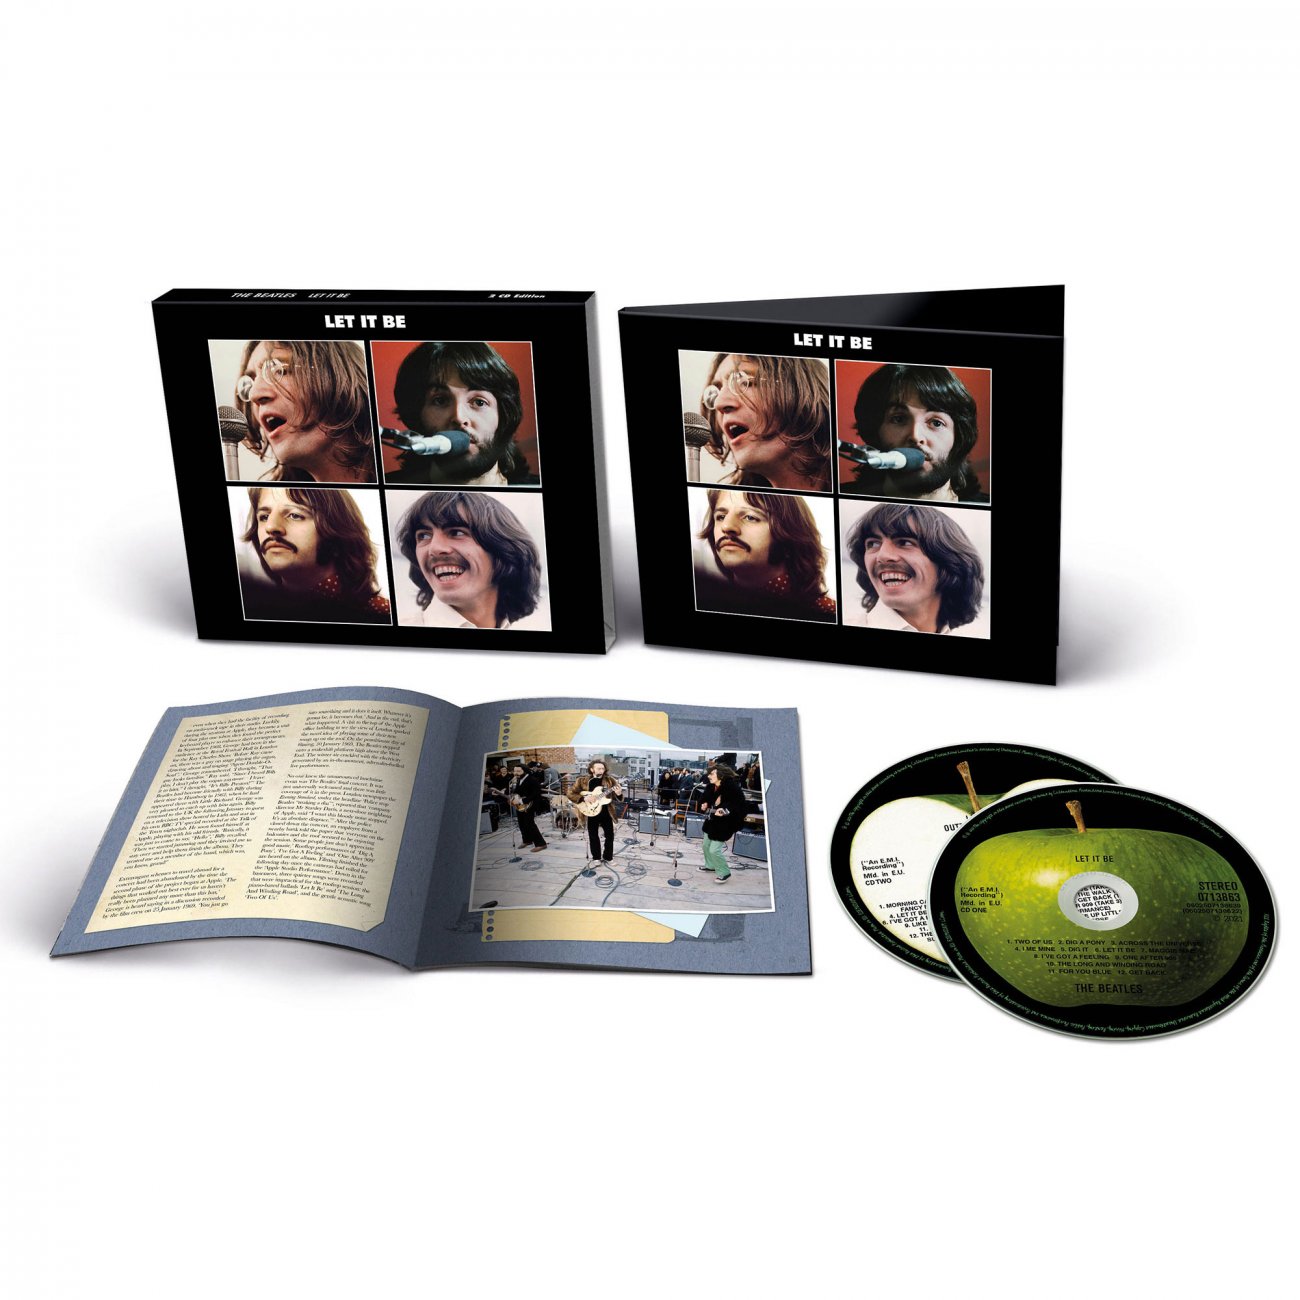 Let It Be Special Edition: Deluxe | The Beatles